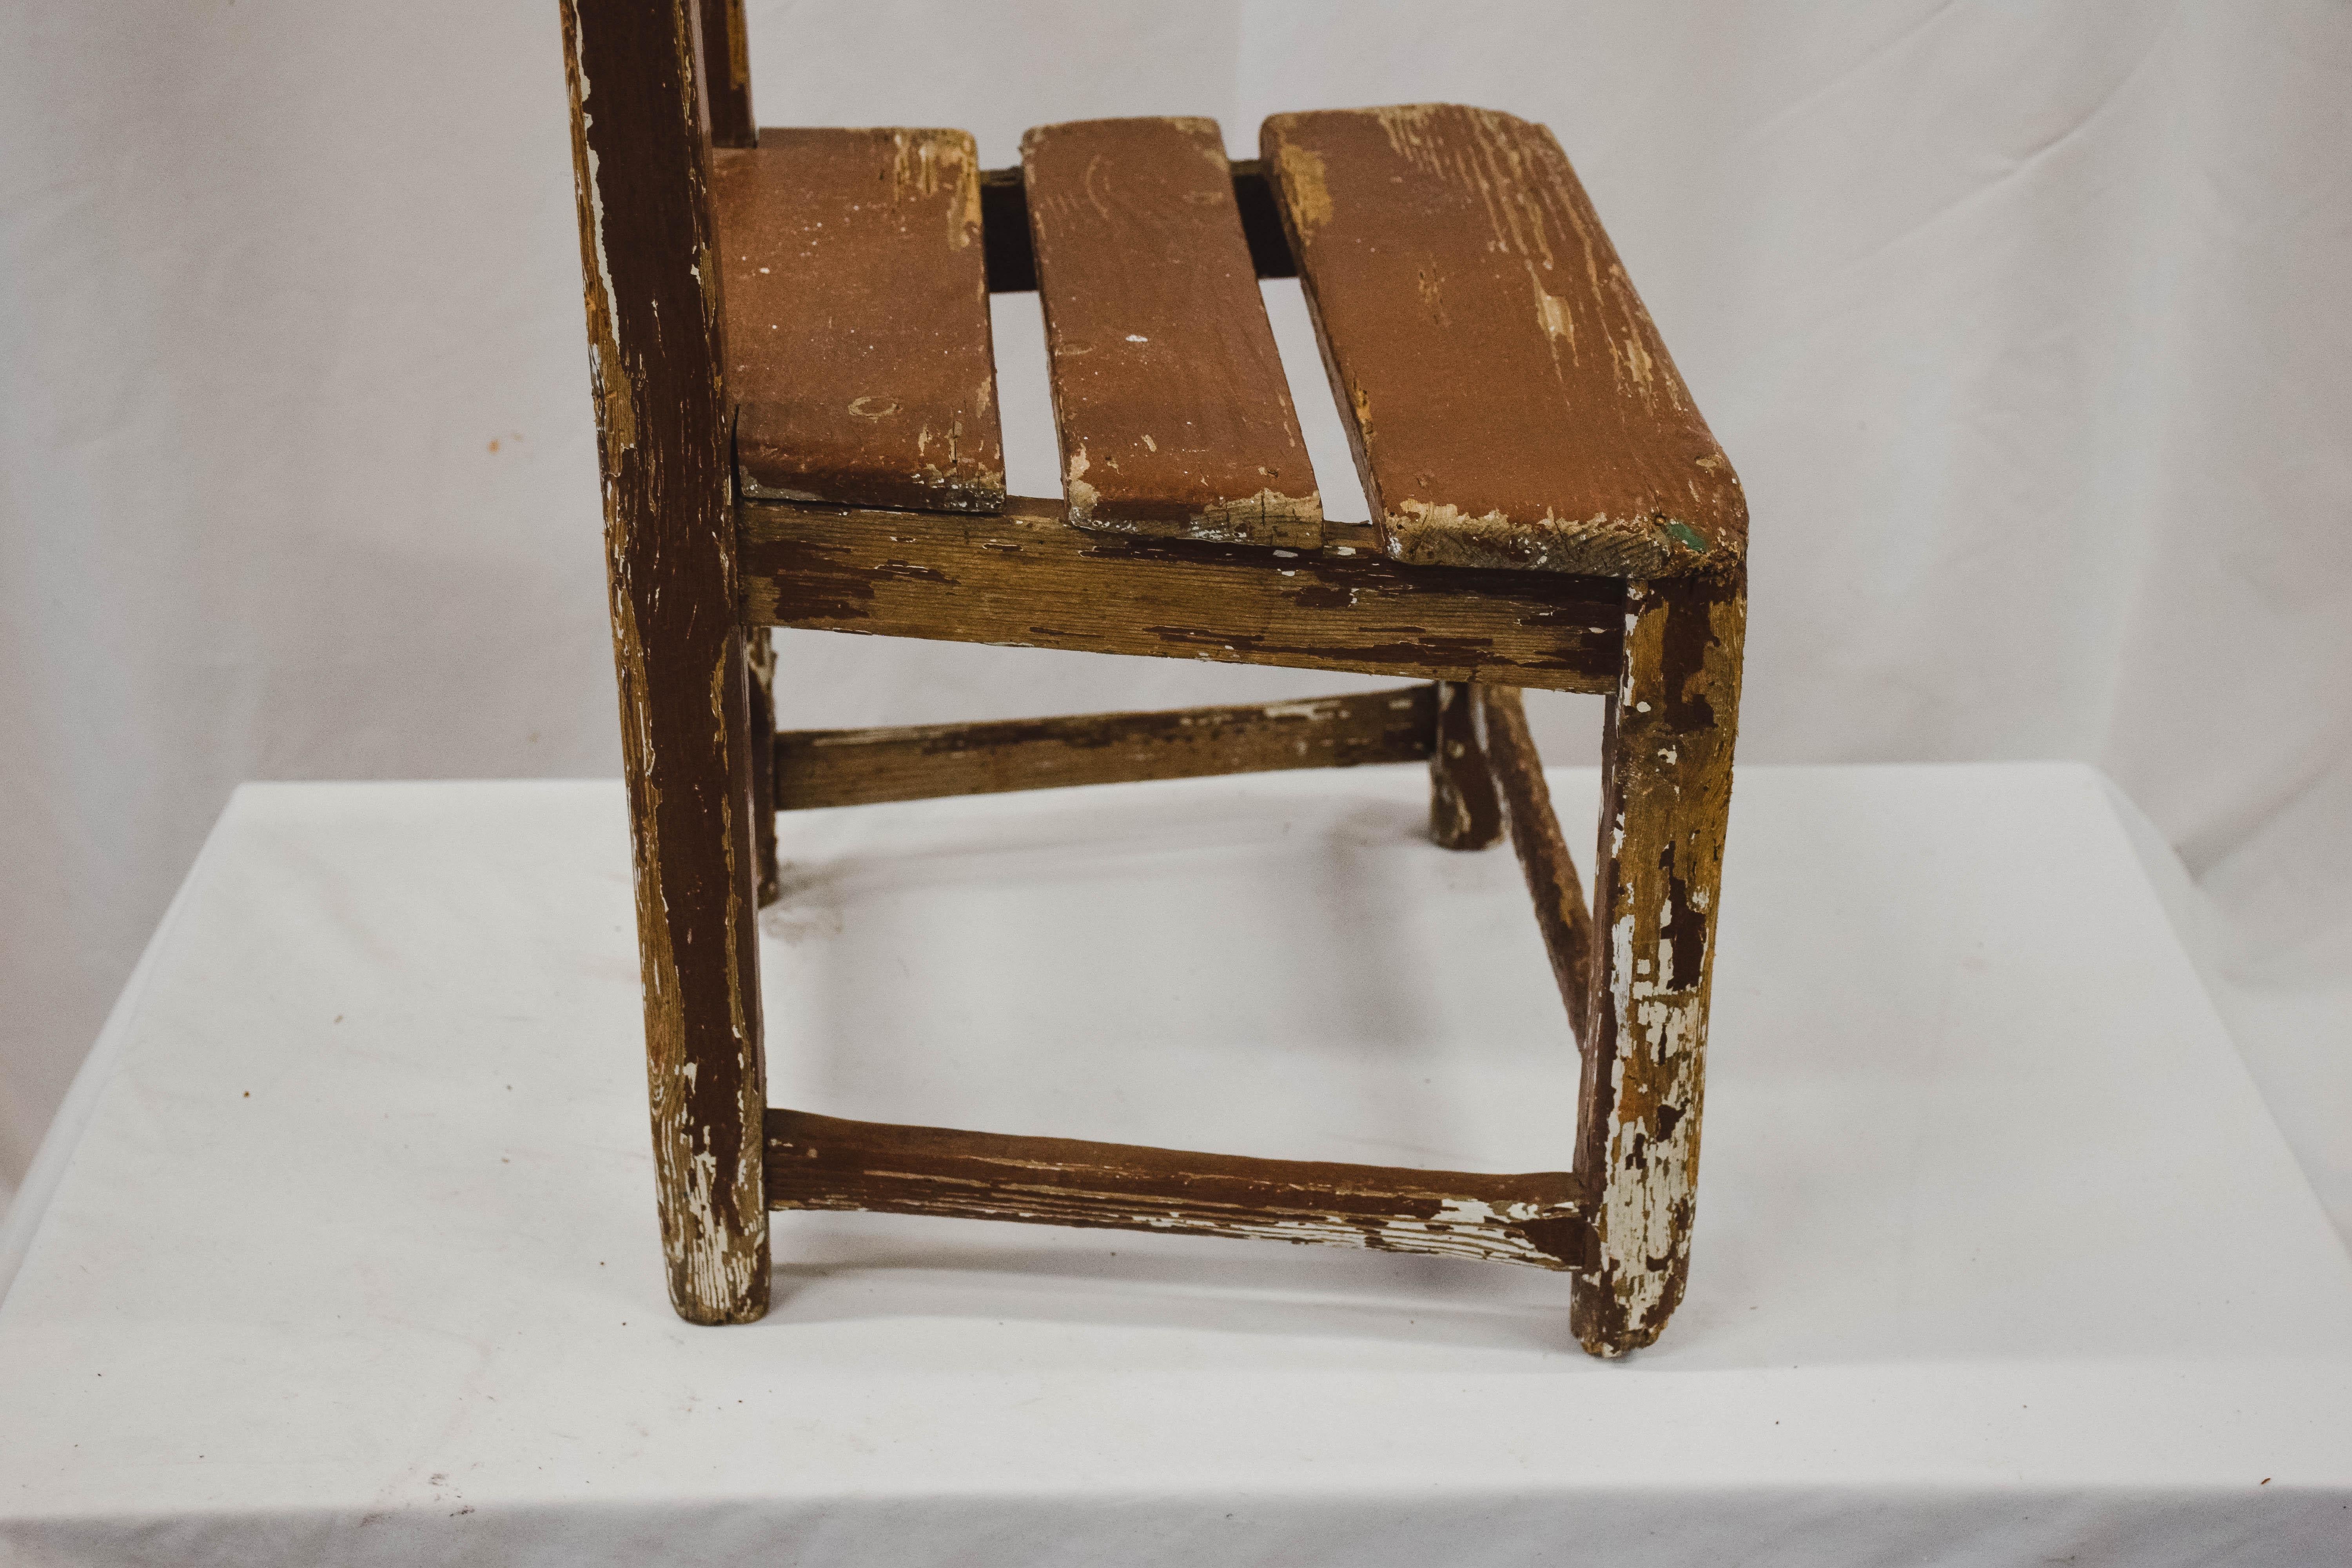 Wood Vintage Child's Chair